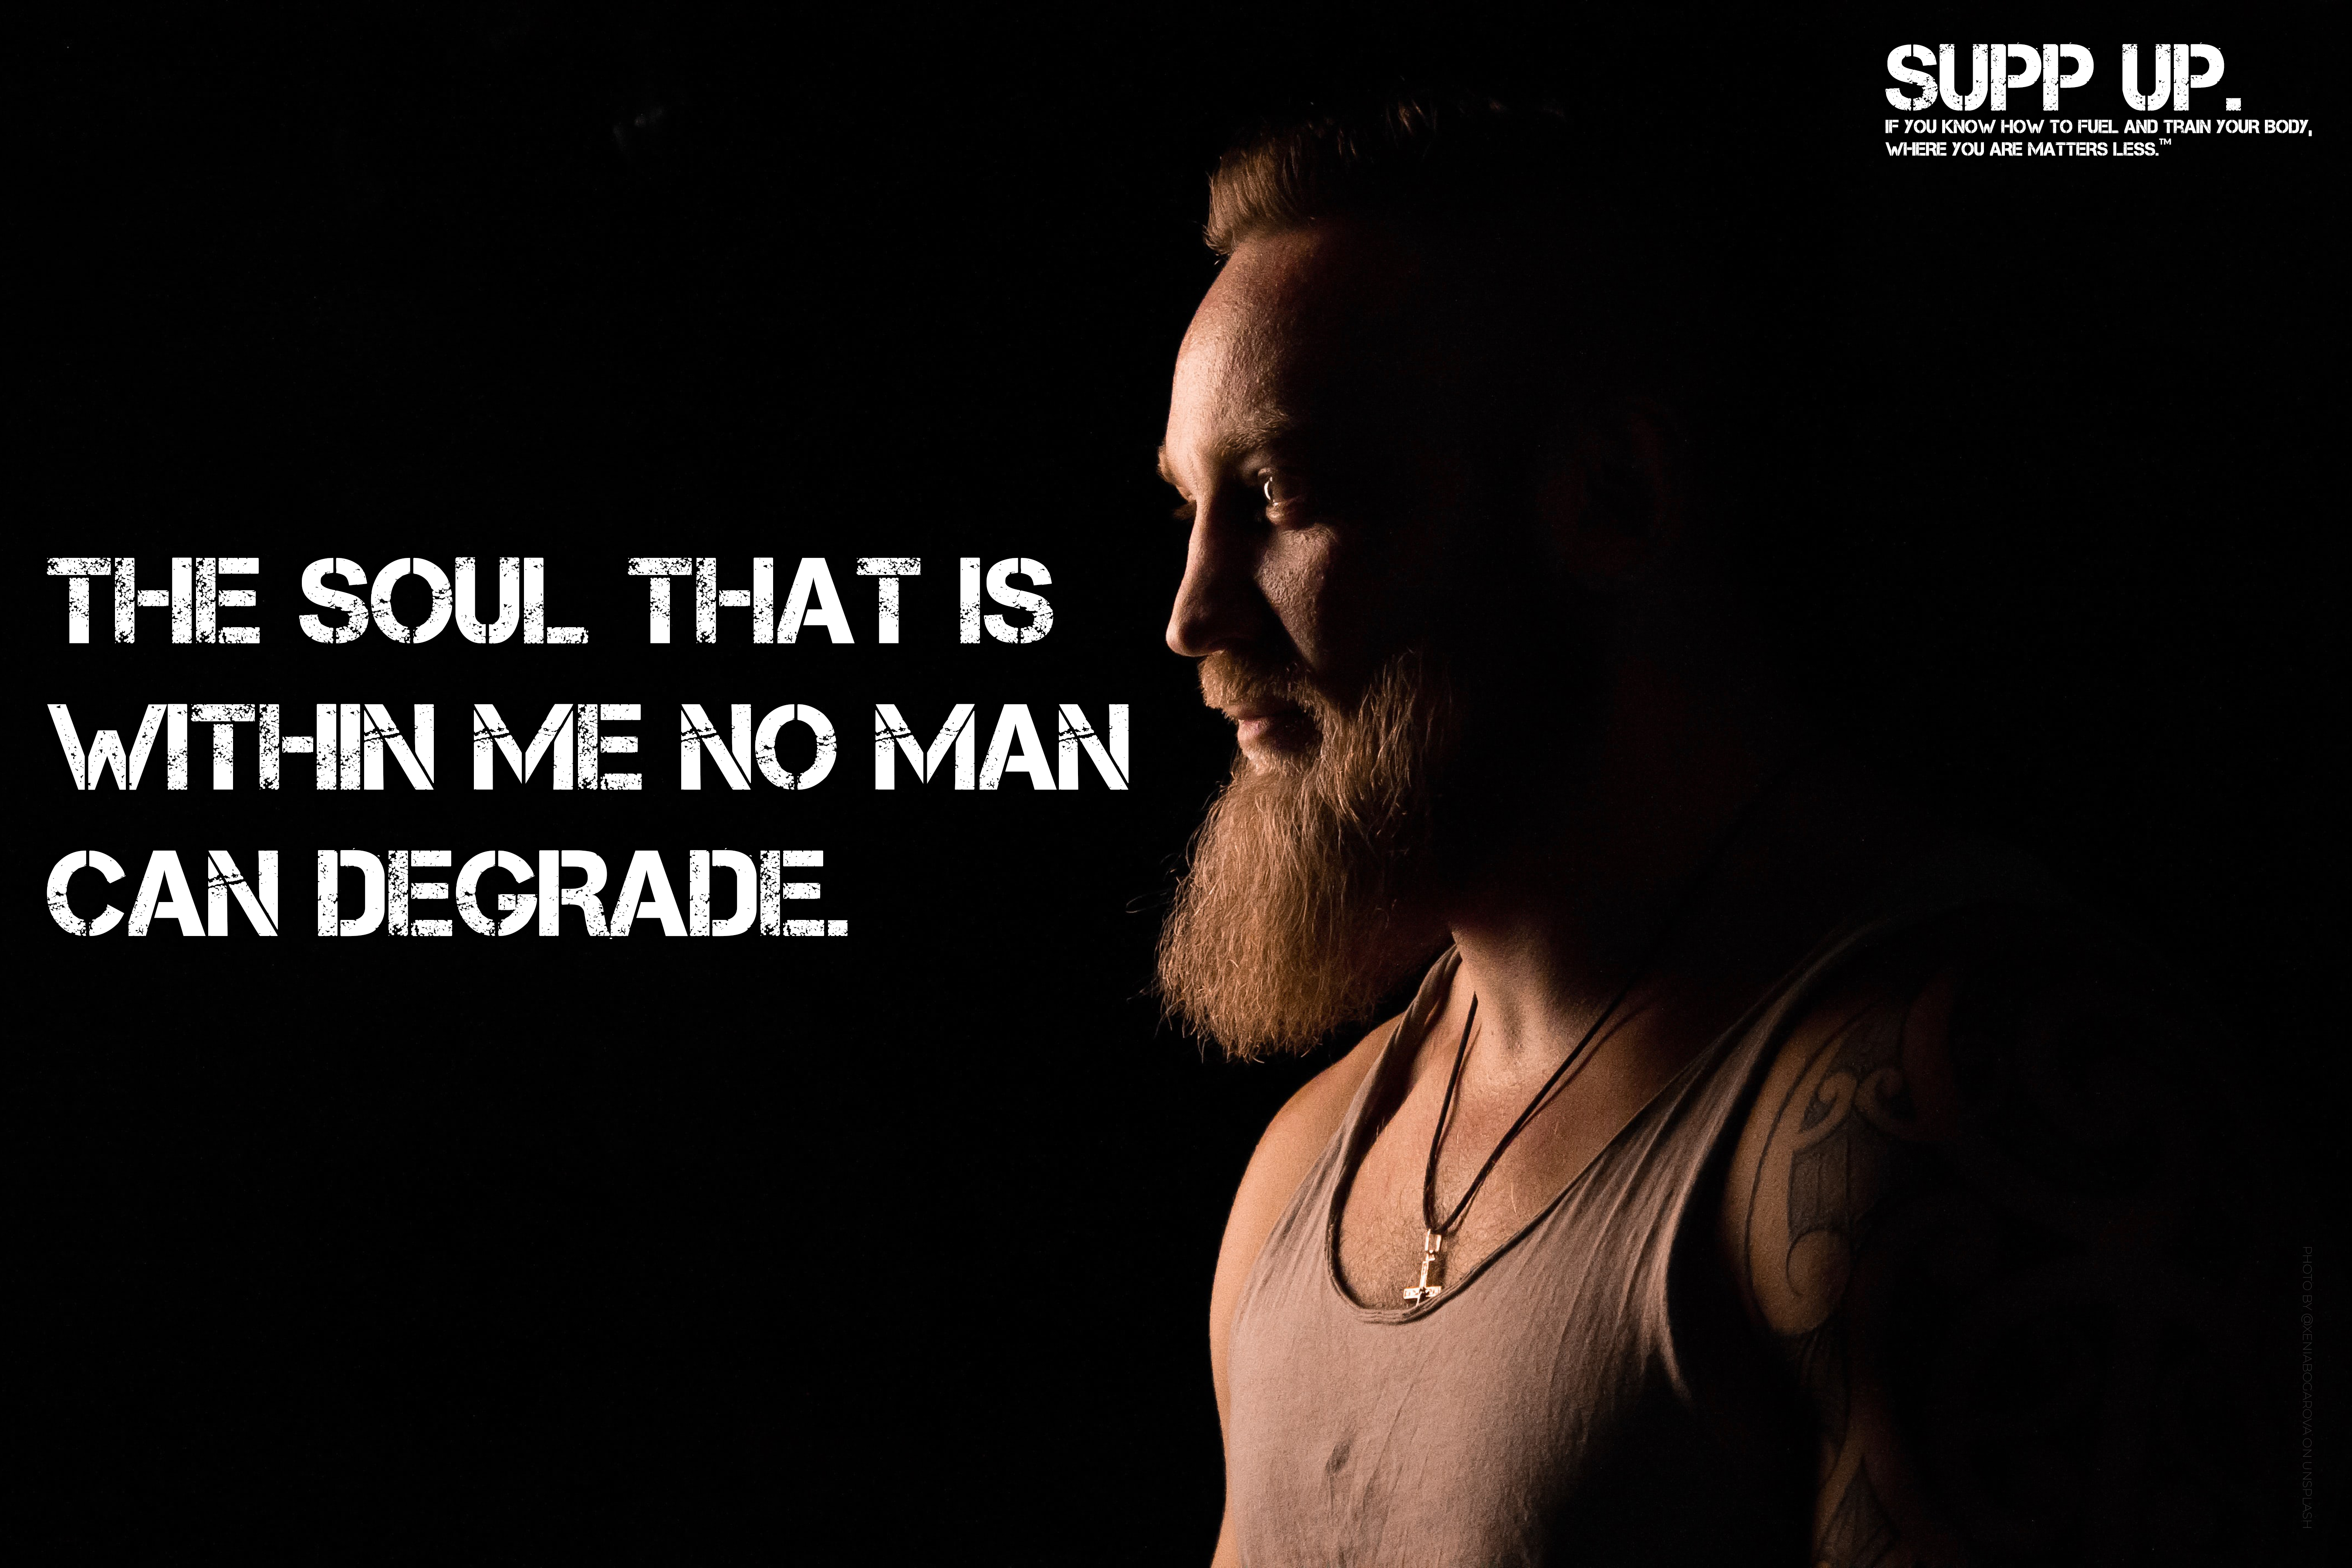 The soul that is within me no man can degrade, The soul that is within me no man can degrade quote, SUPP UP Quotes, Strong quotes, strength quotes, strength quote posters, quote posters, SUPP UP Posters